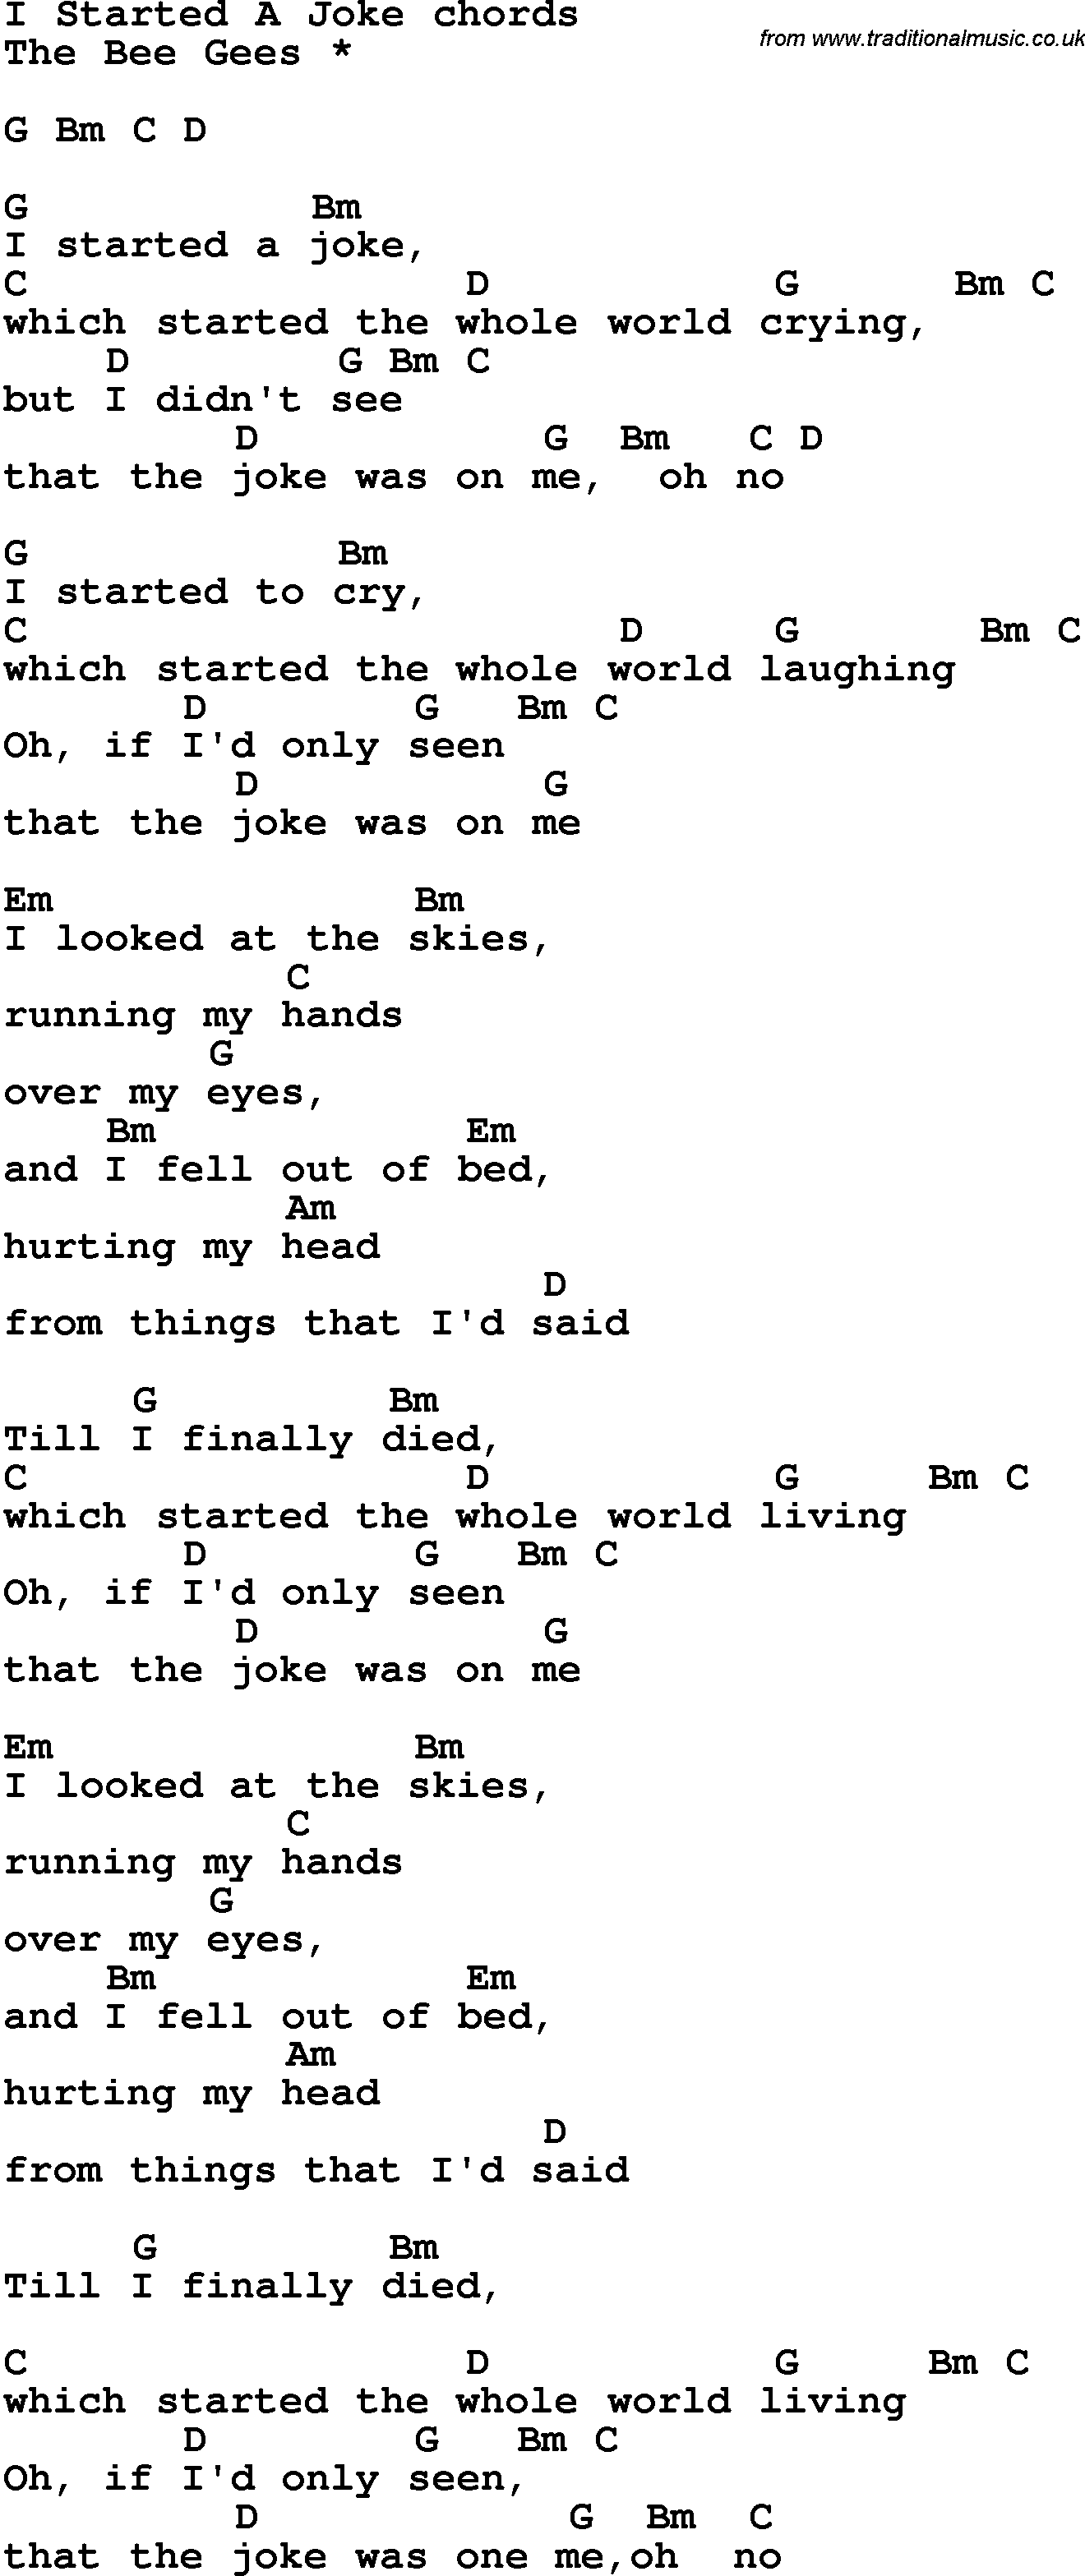 Song Lyrics with guitar chords for I Started A Joke